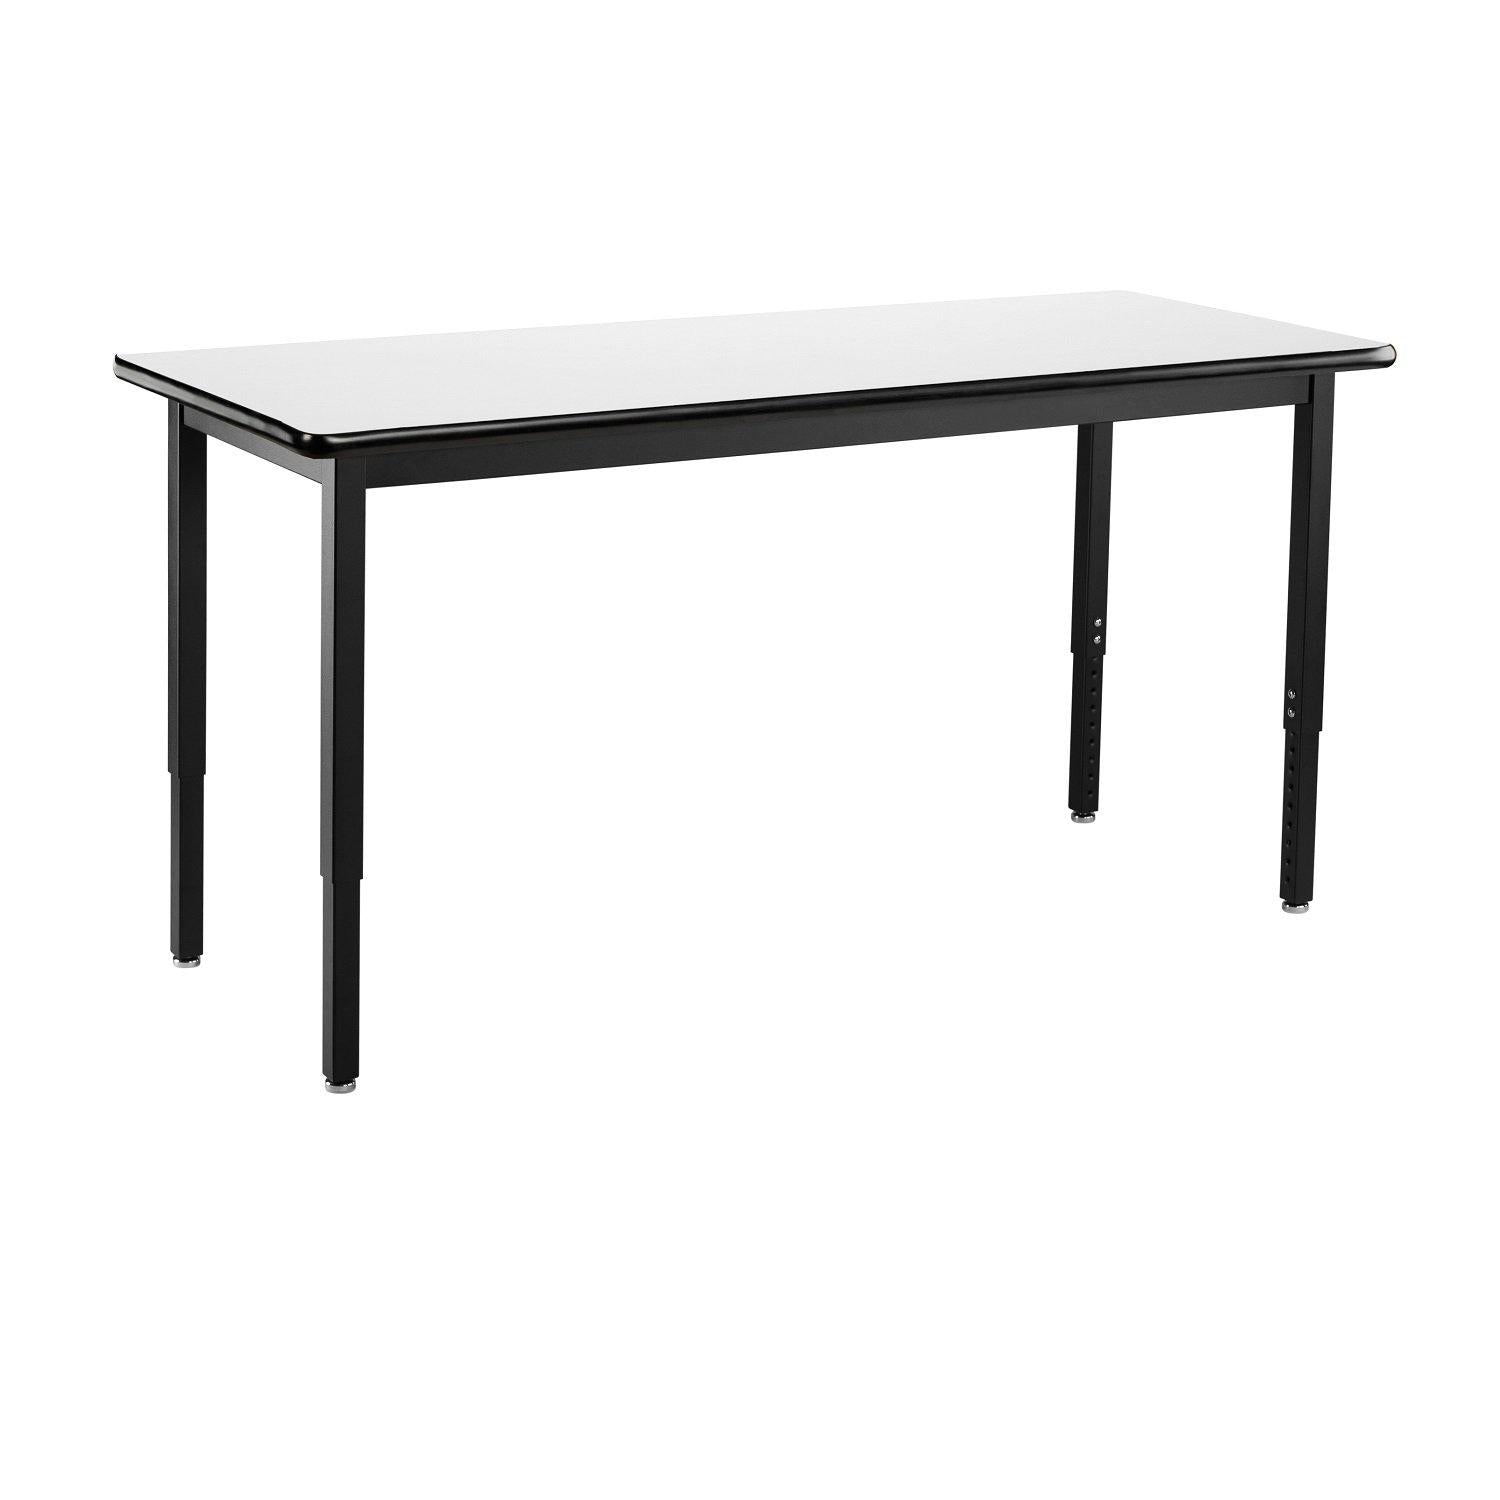 Heavy-Duty Height-Adjustable Utility Table, Black Frame, 24" x 48", Whiteboard High-Pressure Laminate Top